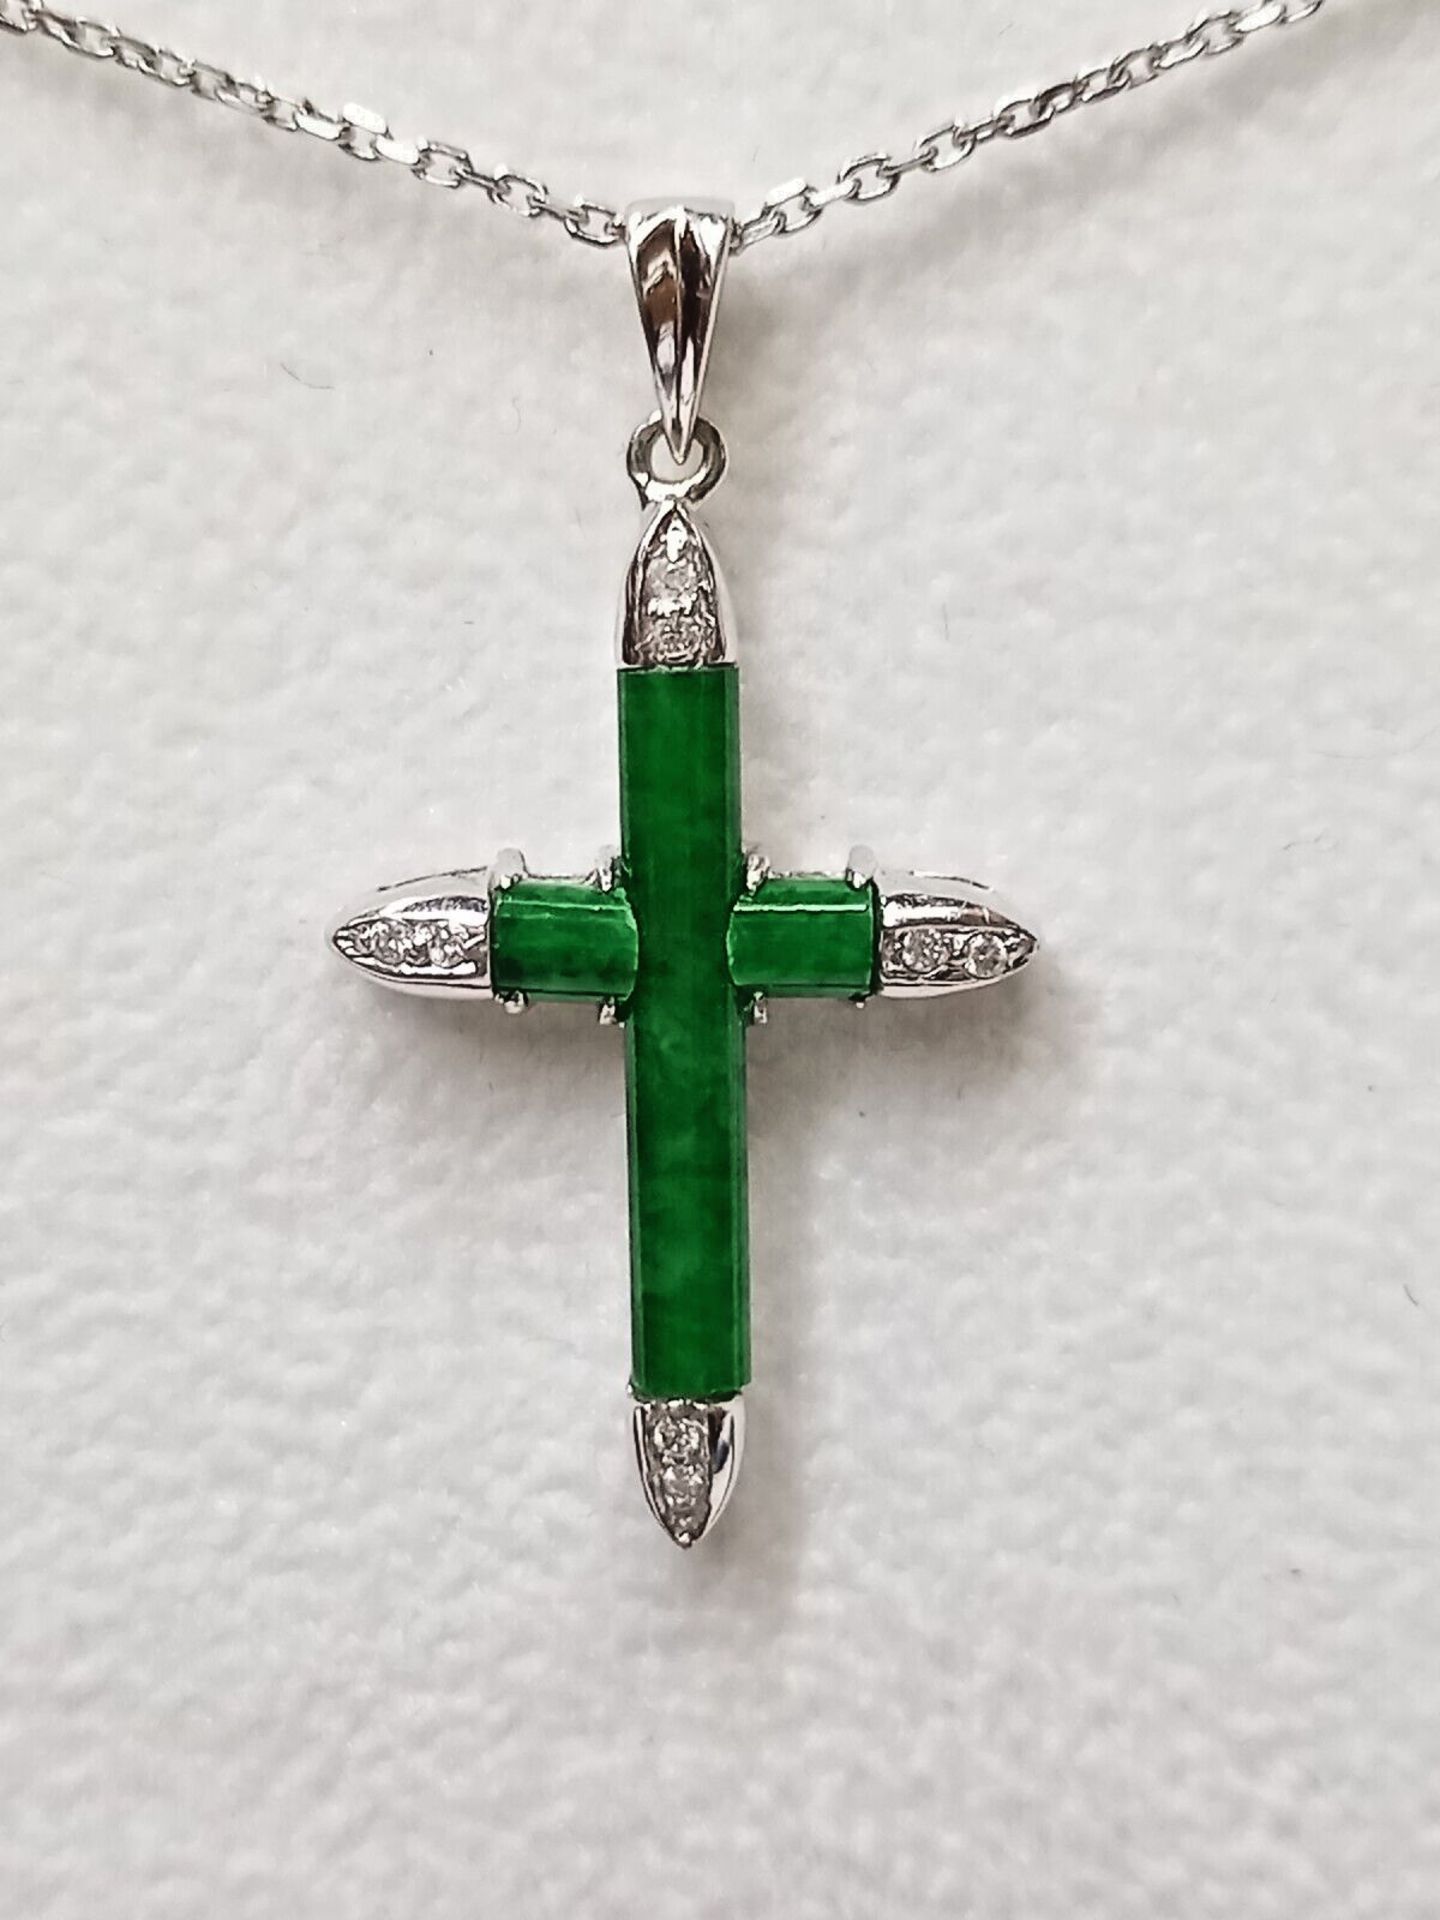 18CT JADE & 0.08CT DIAMOND CROSS PENDANT IN GIFT BOX WITH VALUATION CERTIFICATE OF £895